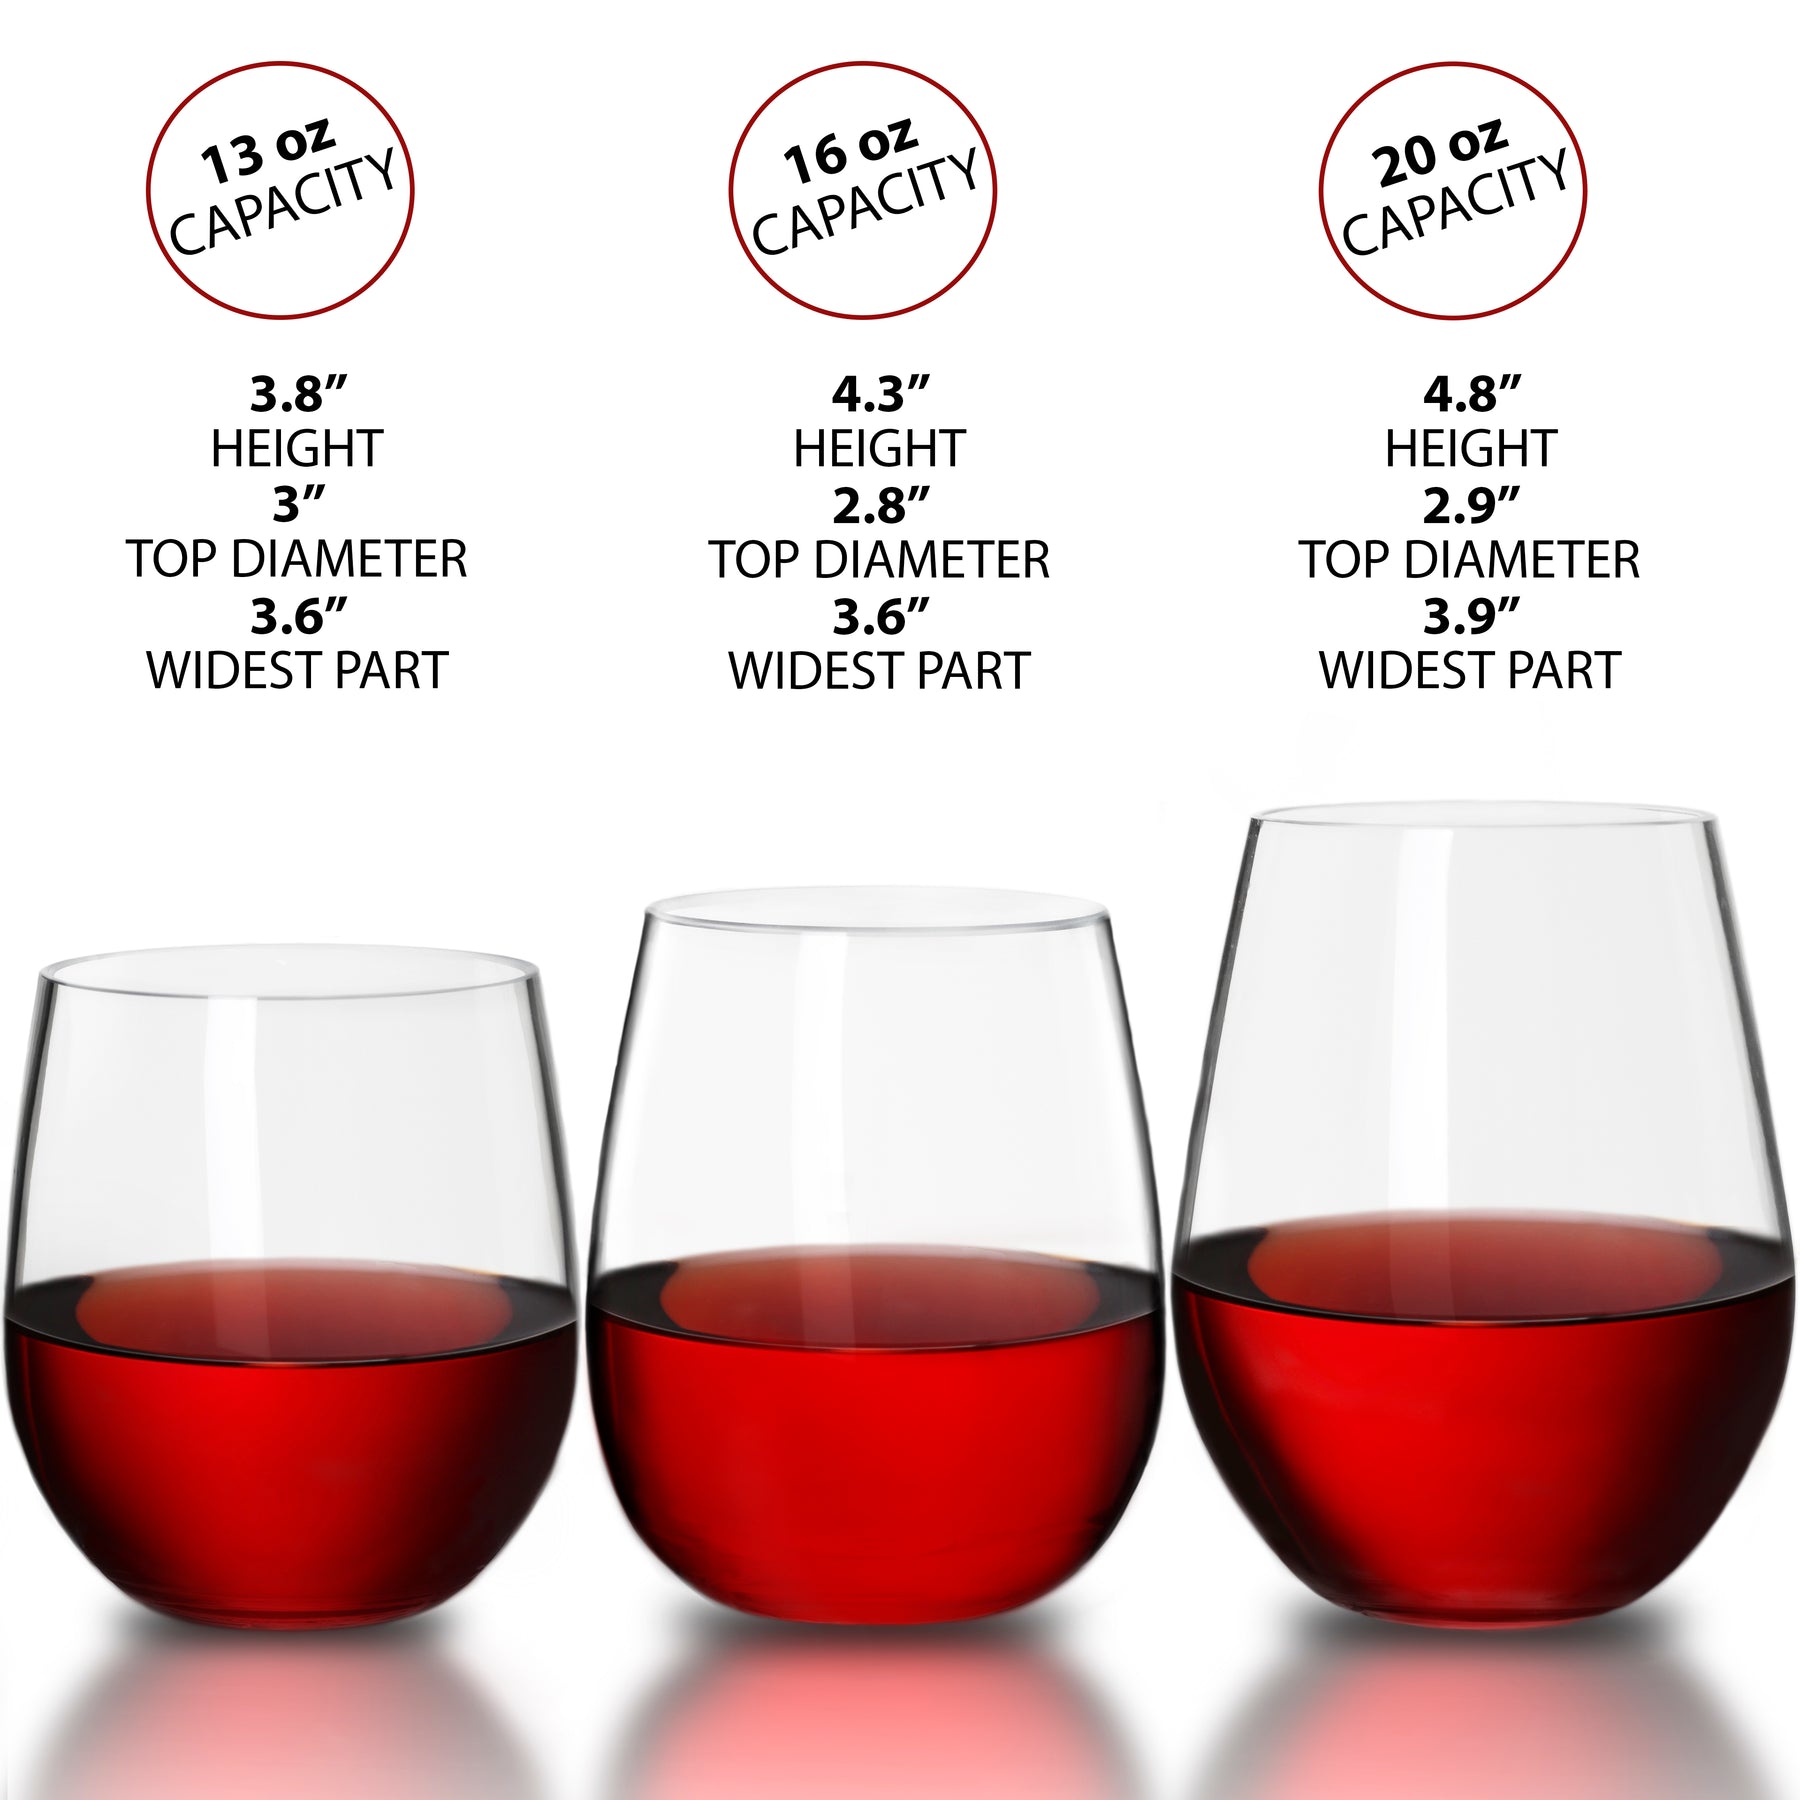 Spill-Free Stemless Sippers : Fragile Studios 'Saturn Wine Glasses